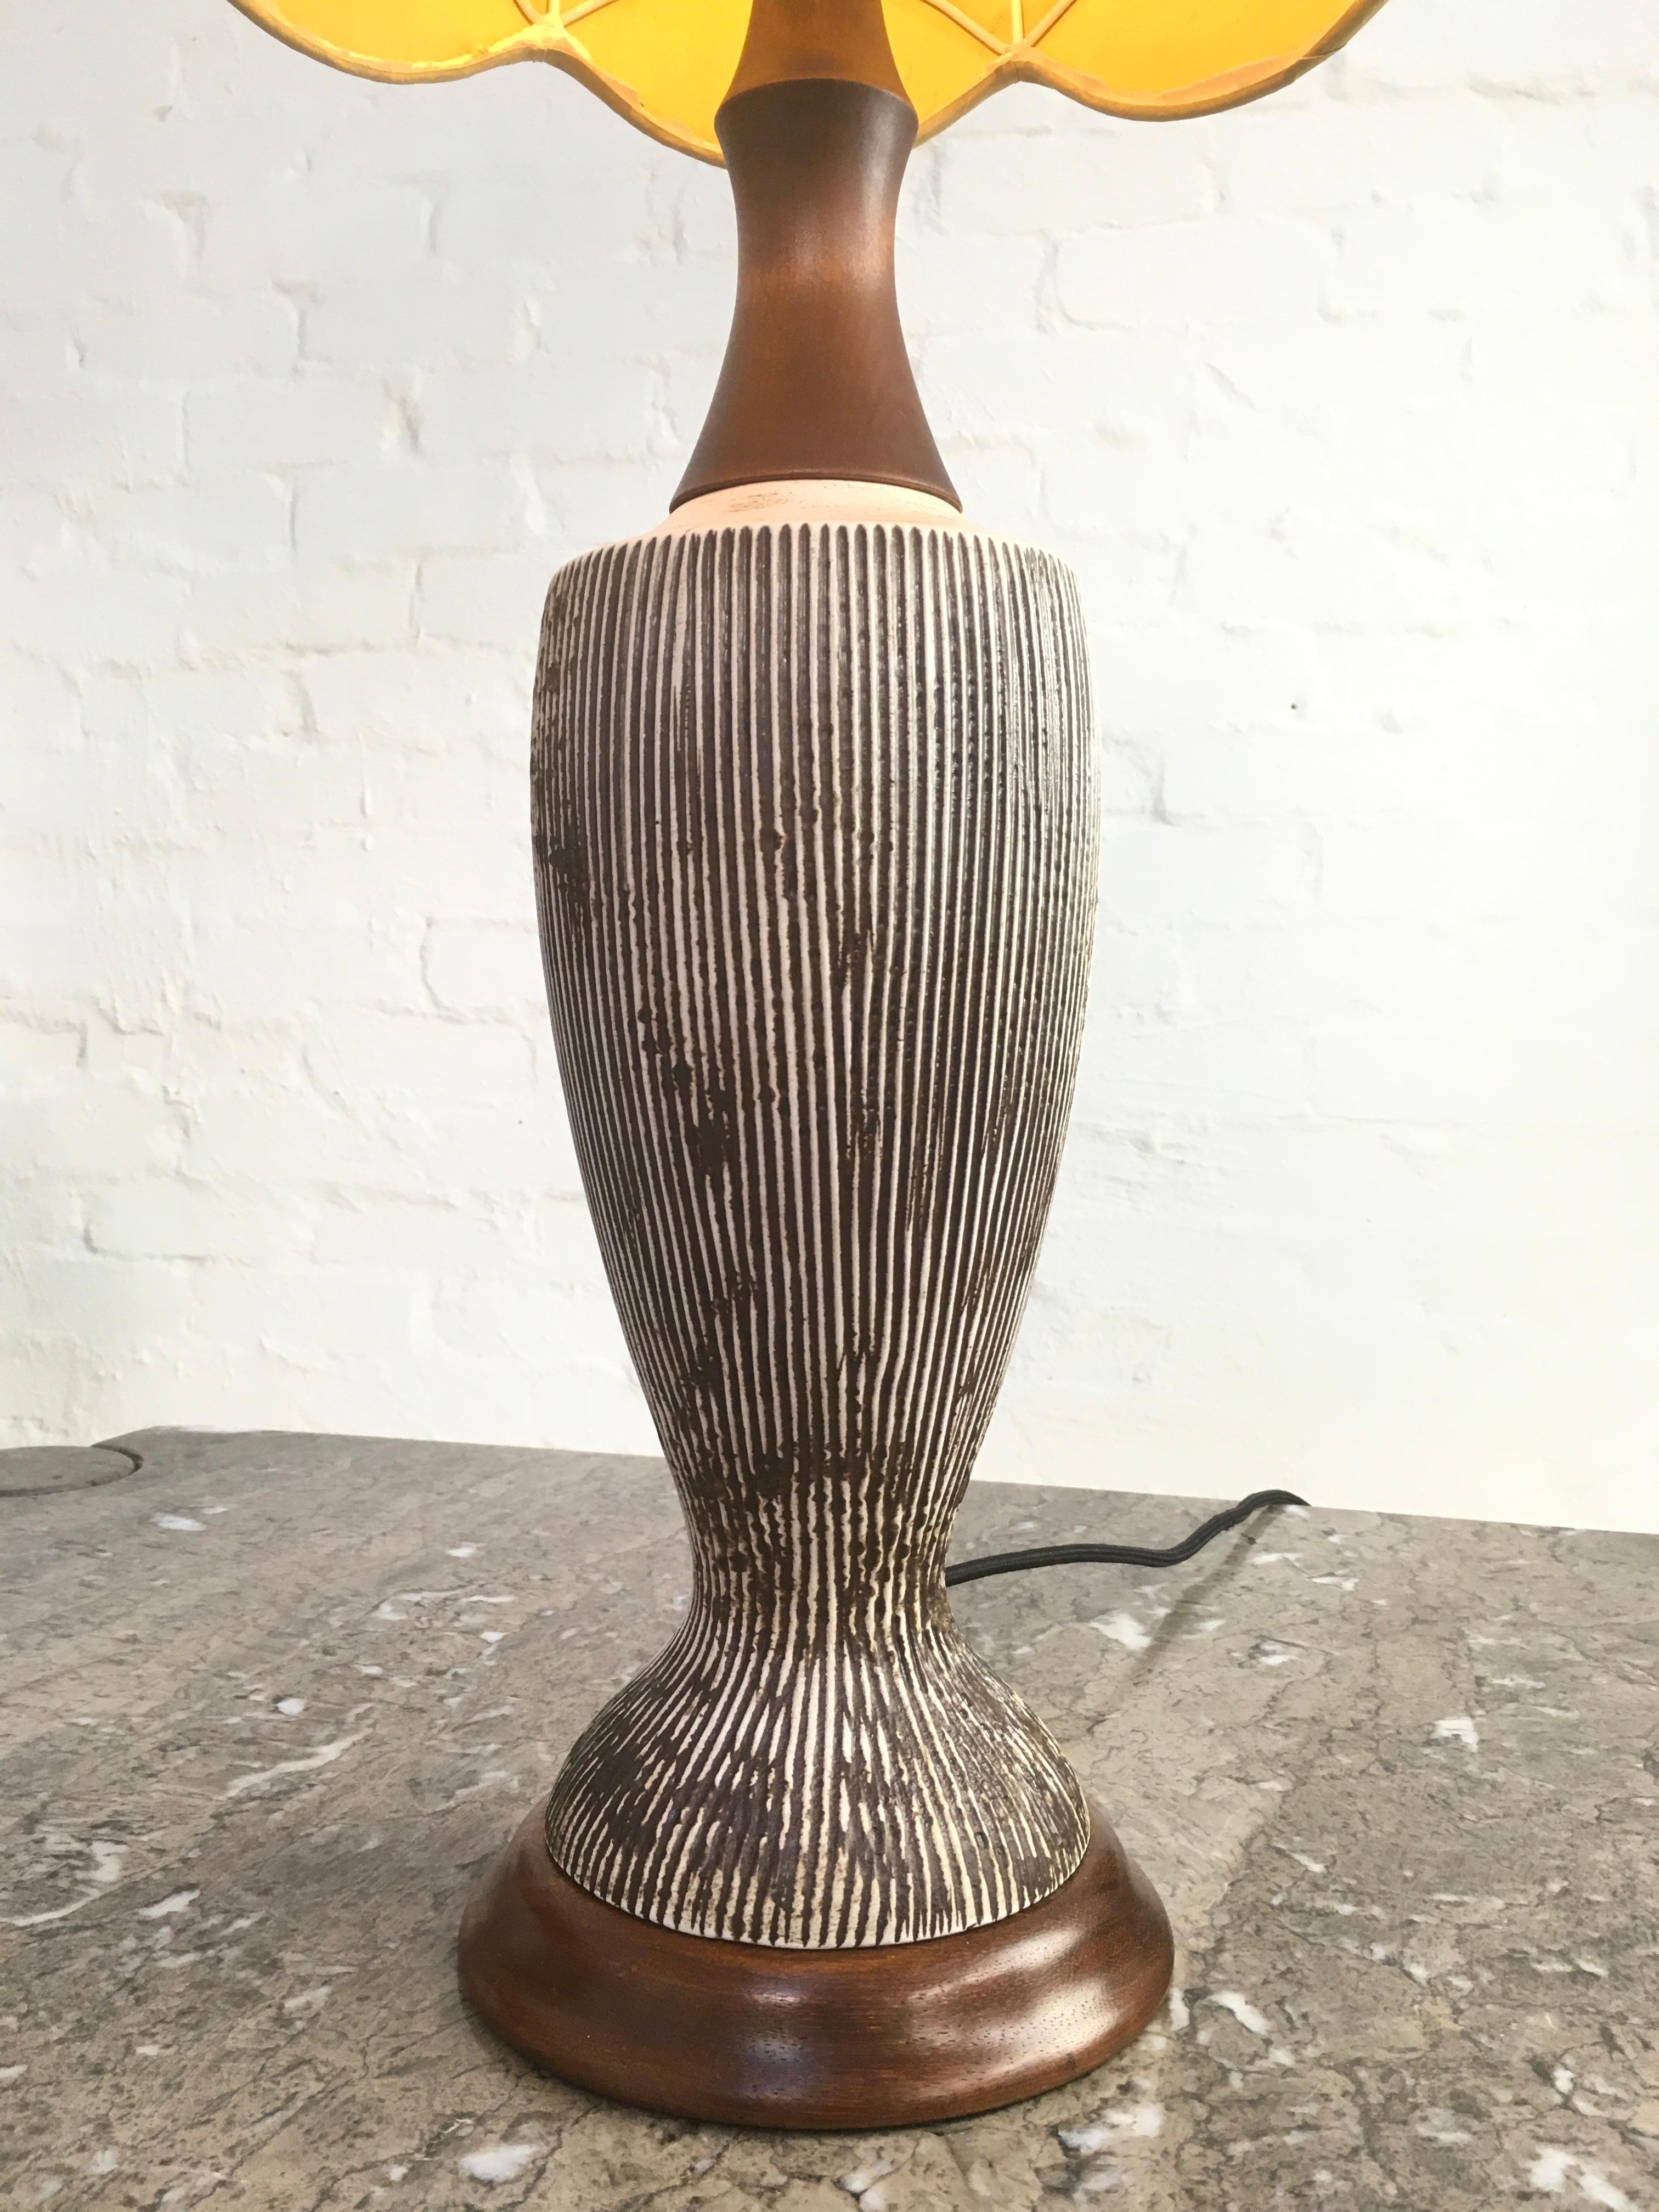 Hand-Crafted Ellis Pottery Sgraffito Ceramic and 'Walnut' Table Lamp Base Melbourne, 1950s For Sale